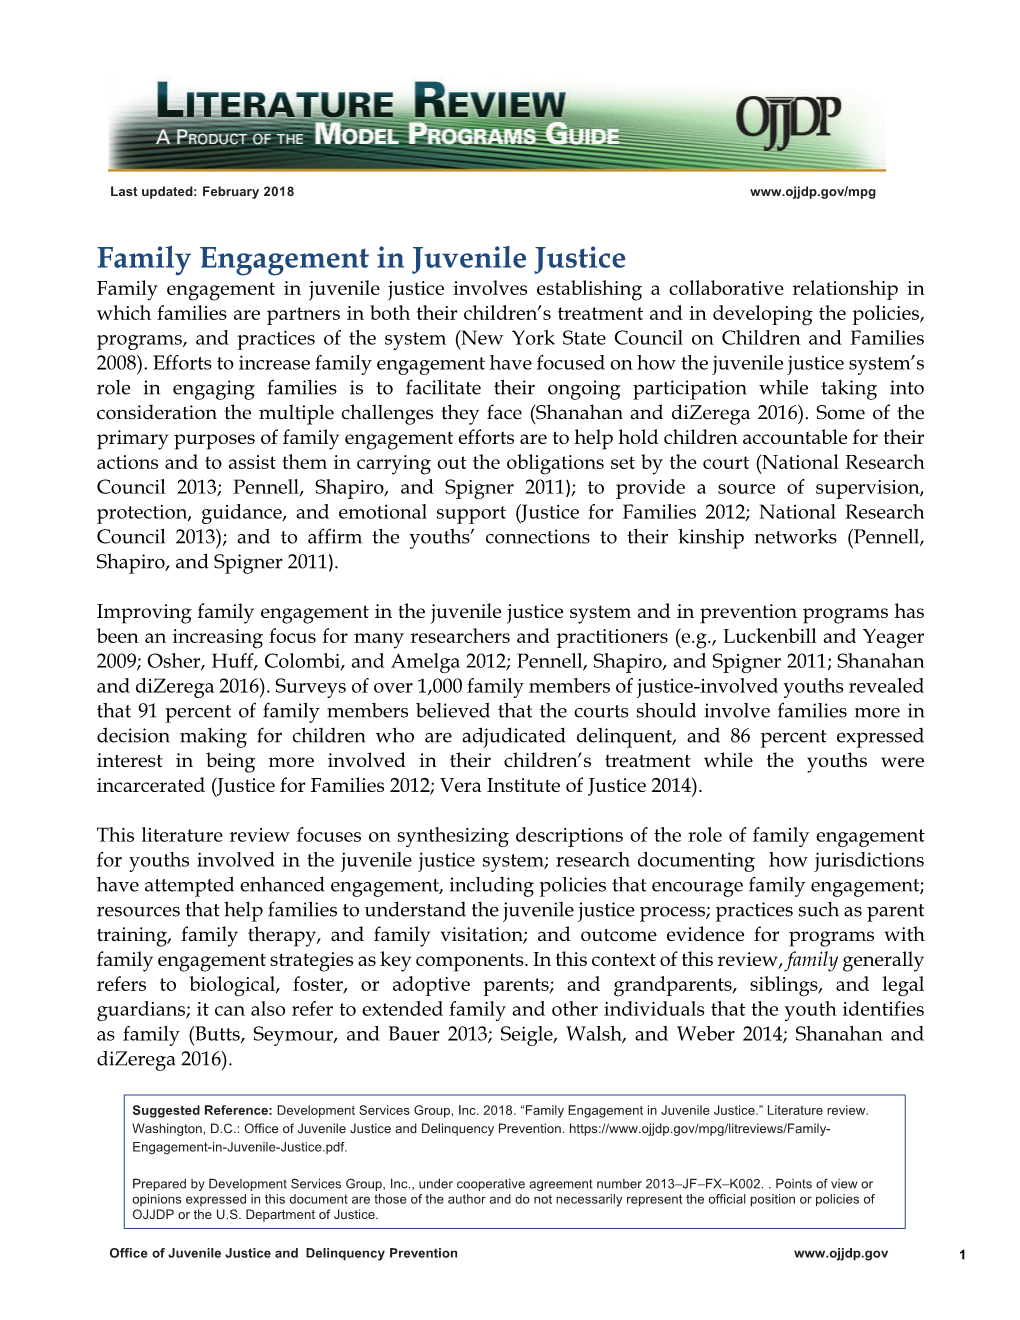 Family Engagement in Juvenile Justice